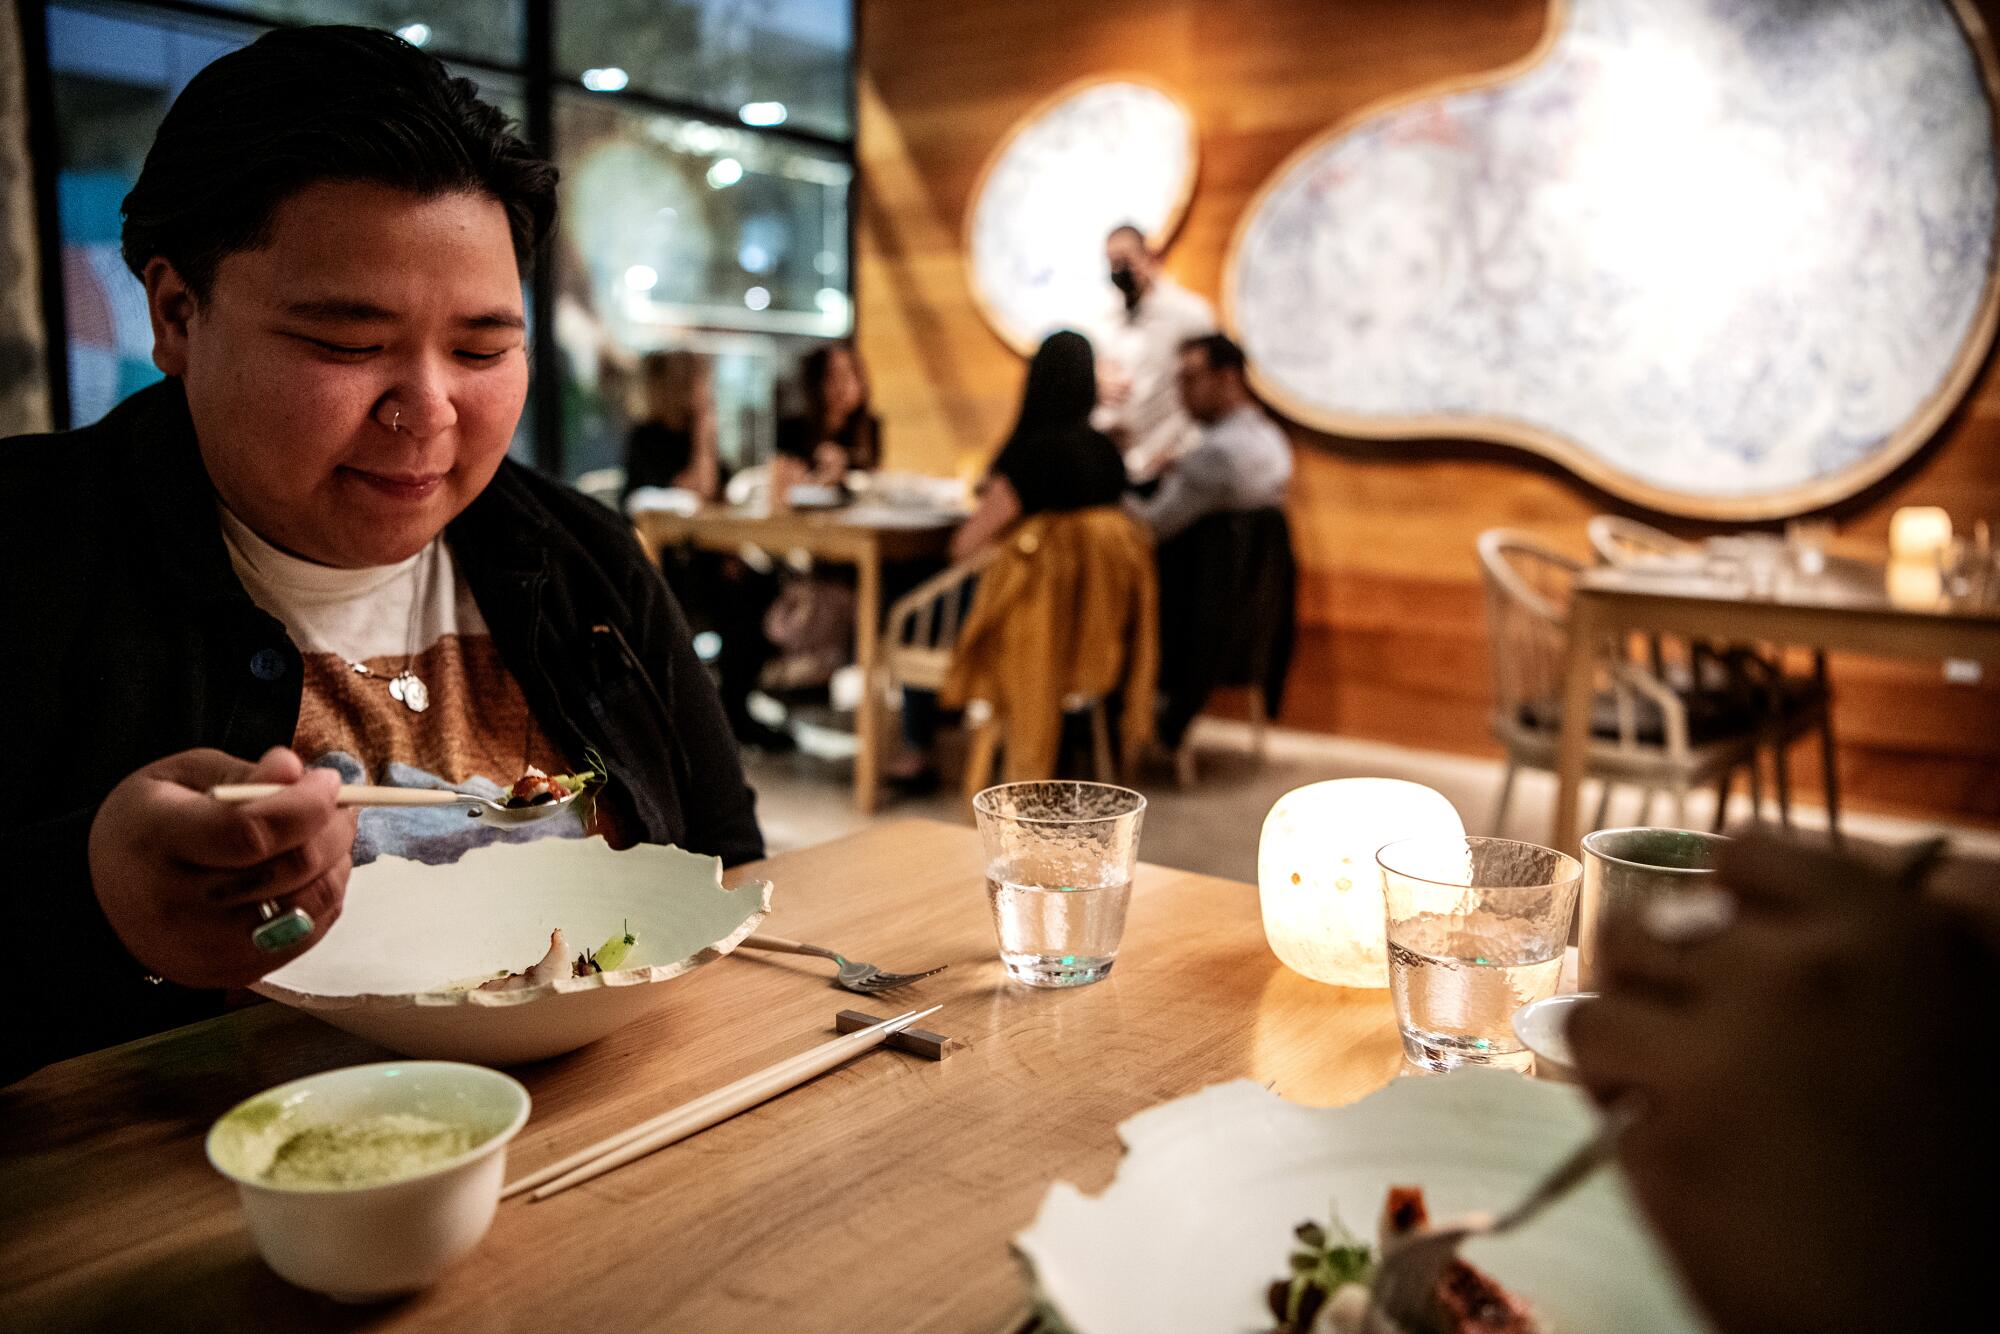 The dining scene at Kato. CT Ucol and Czarah Castro (not shown) enjoy a night out at Kato's new location at the Row DTLA.